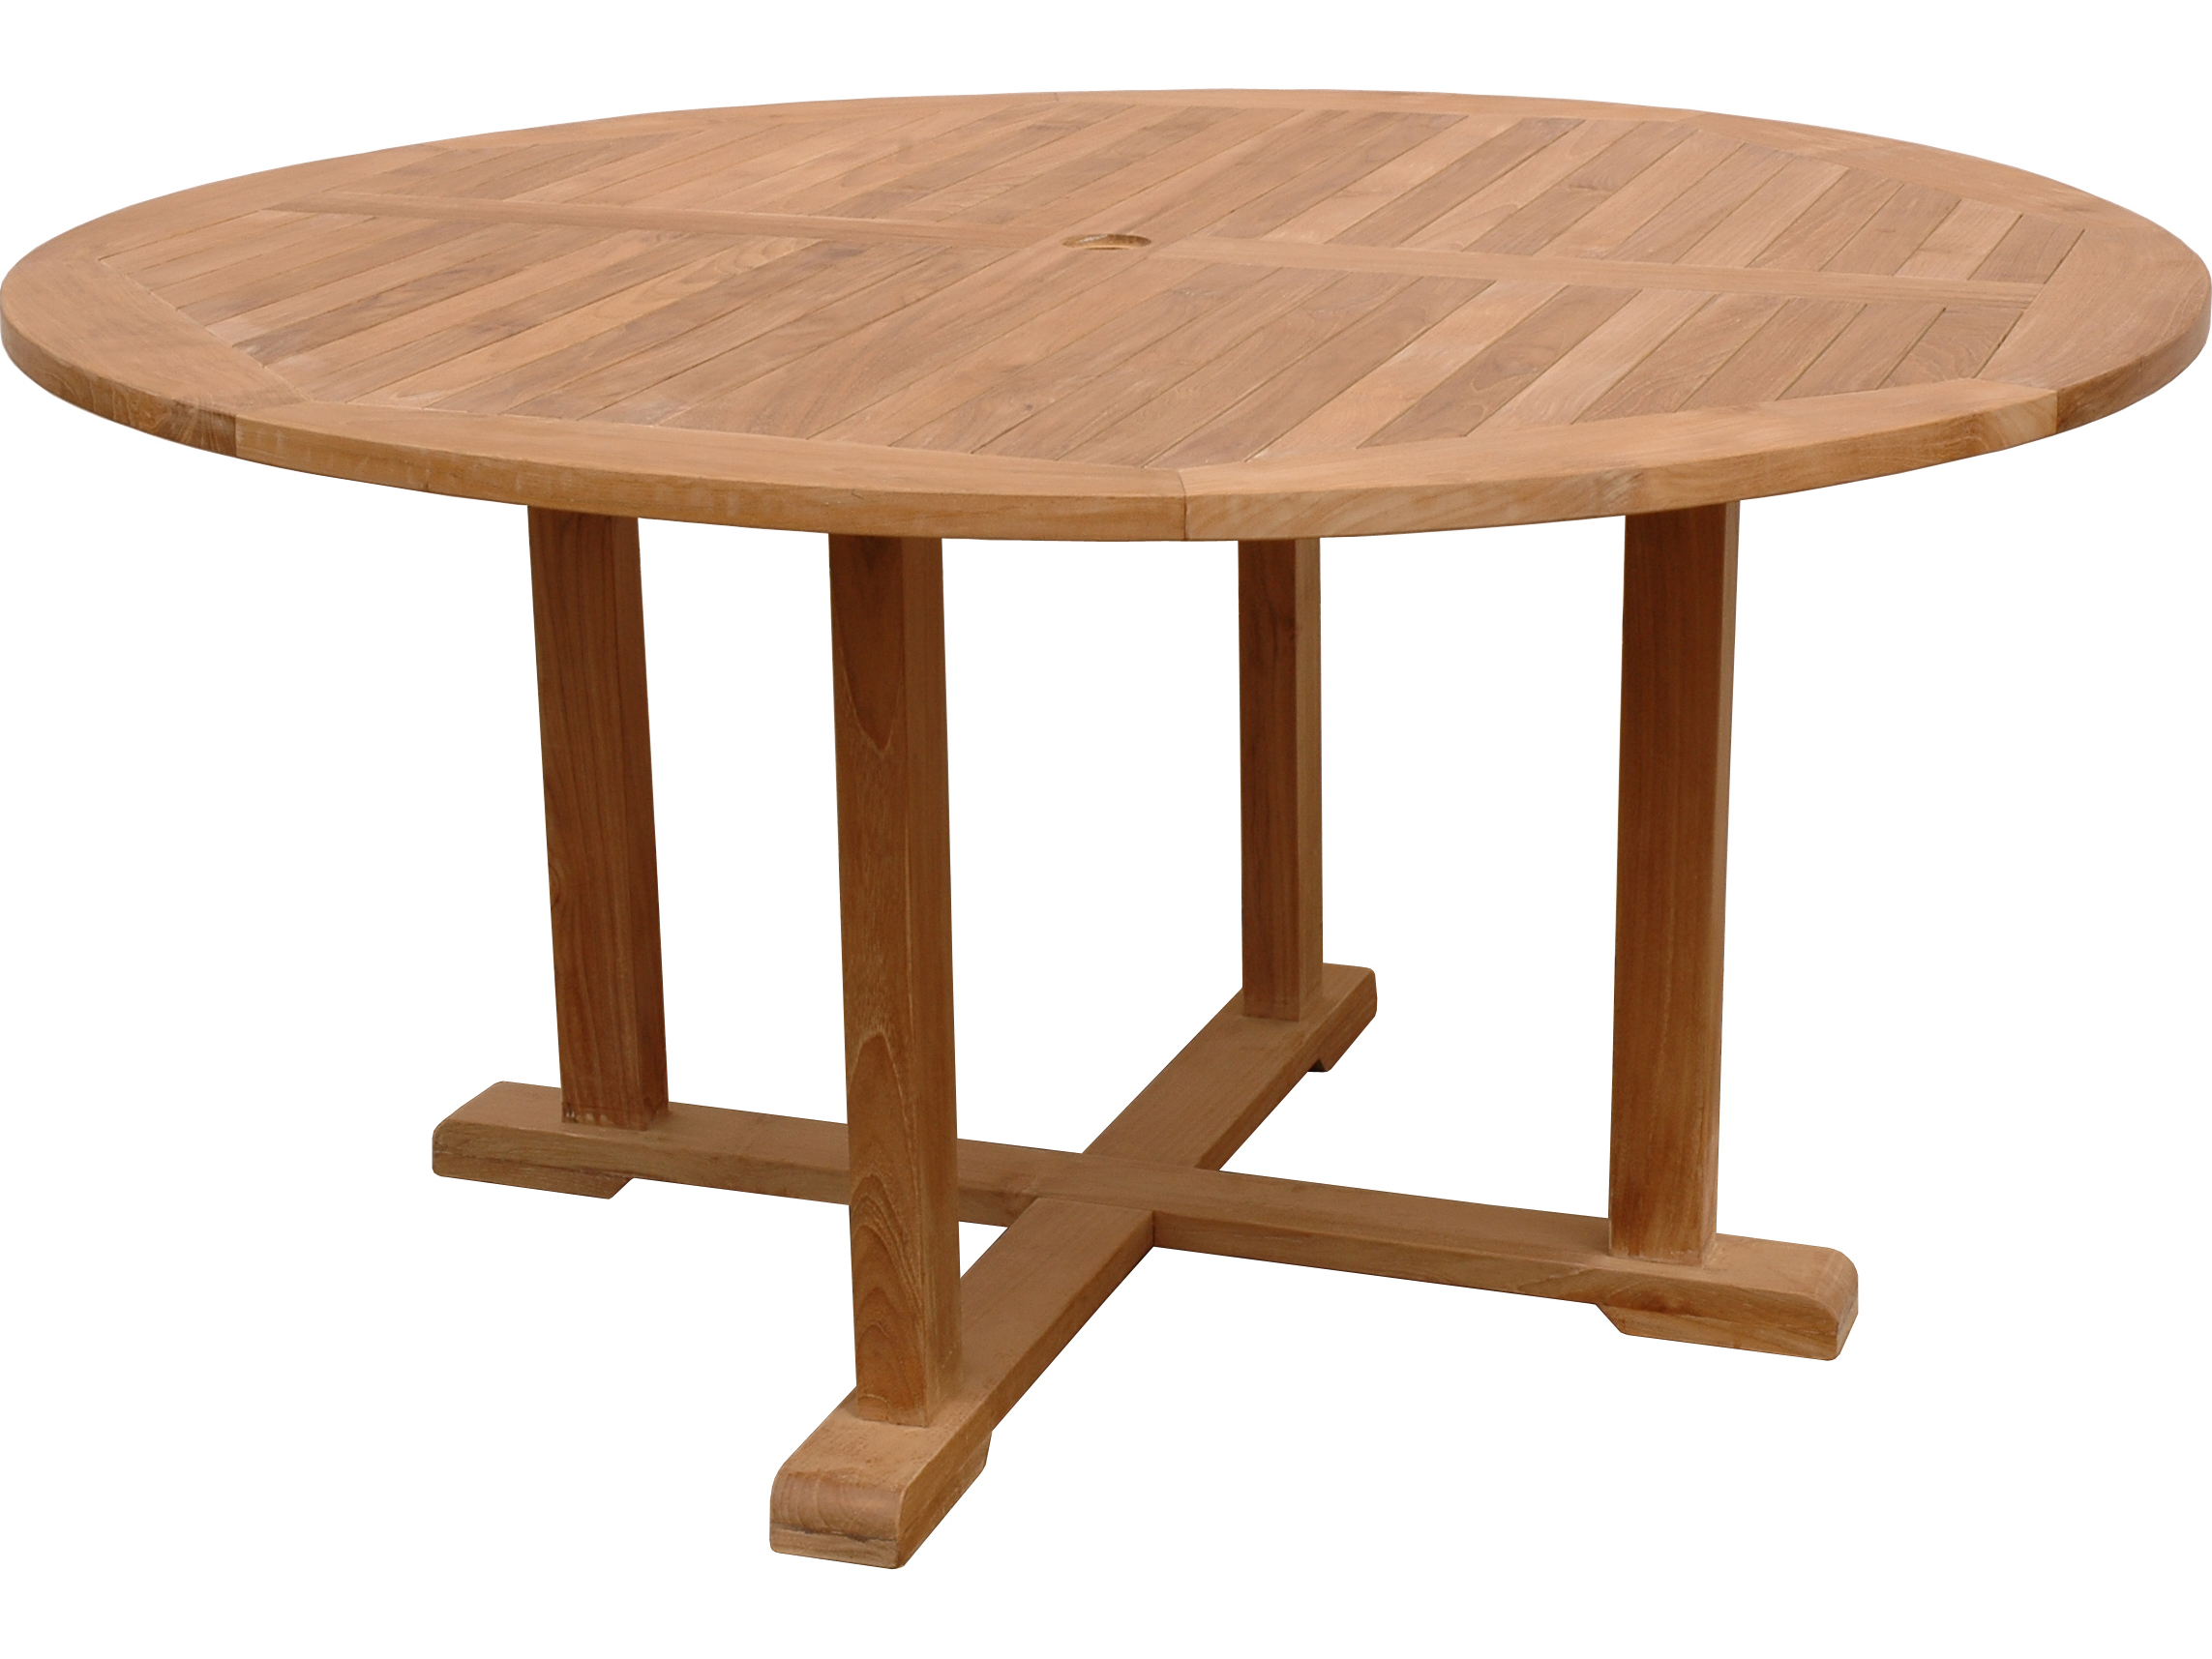 Anderson Teak Tosca 5 Foot Round Table Aktb005rf